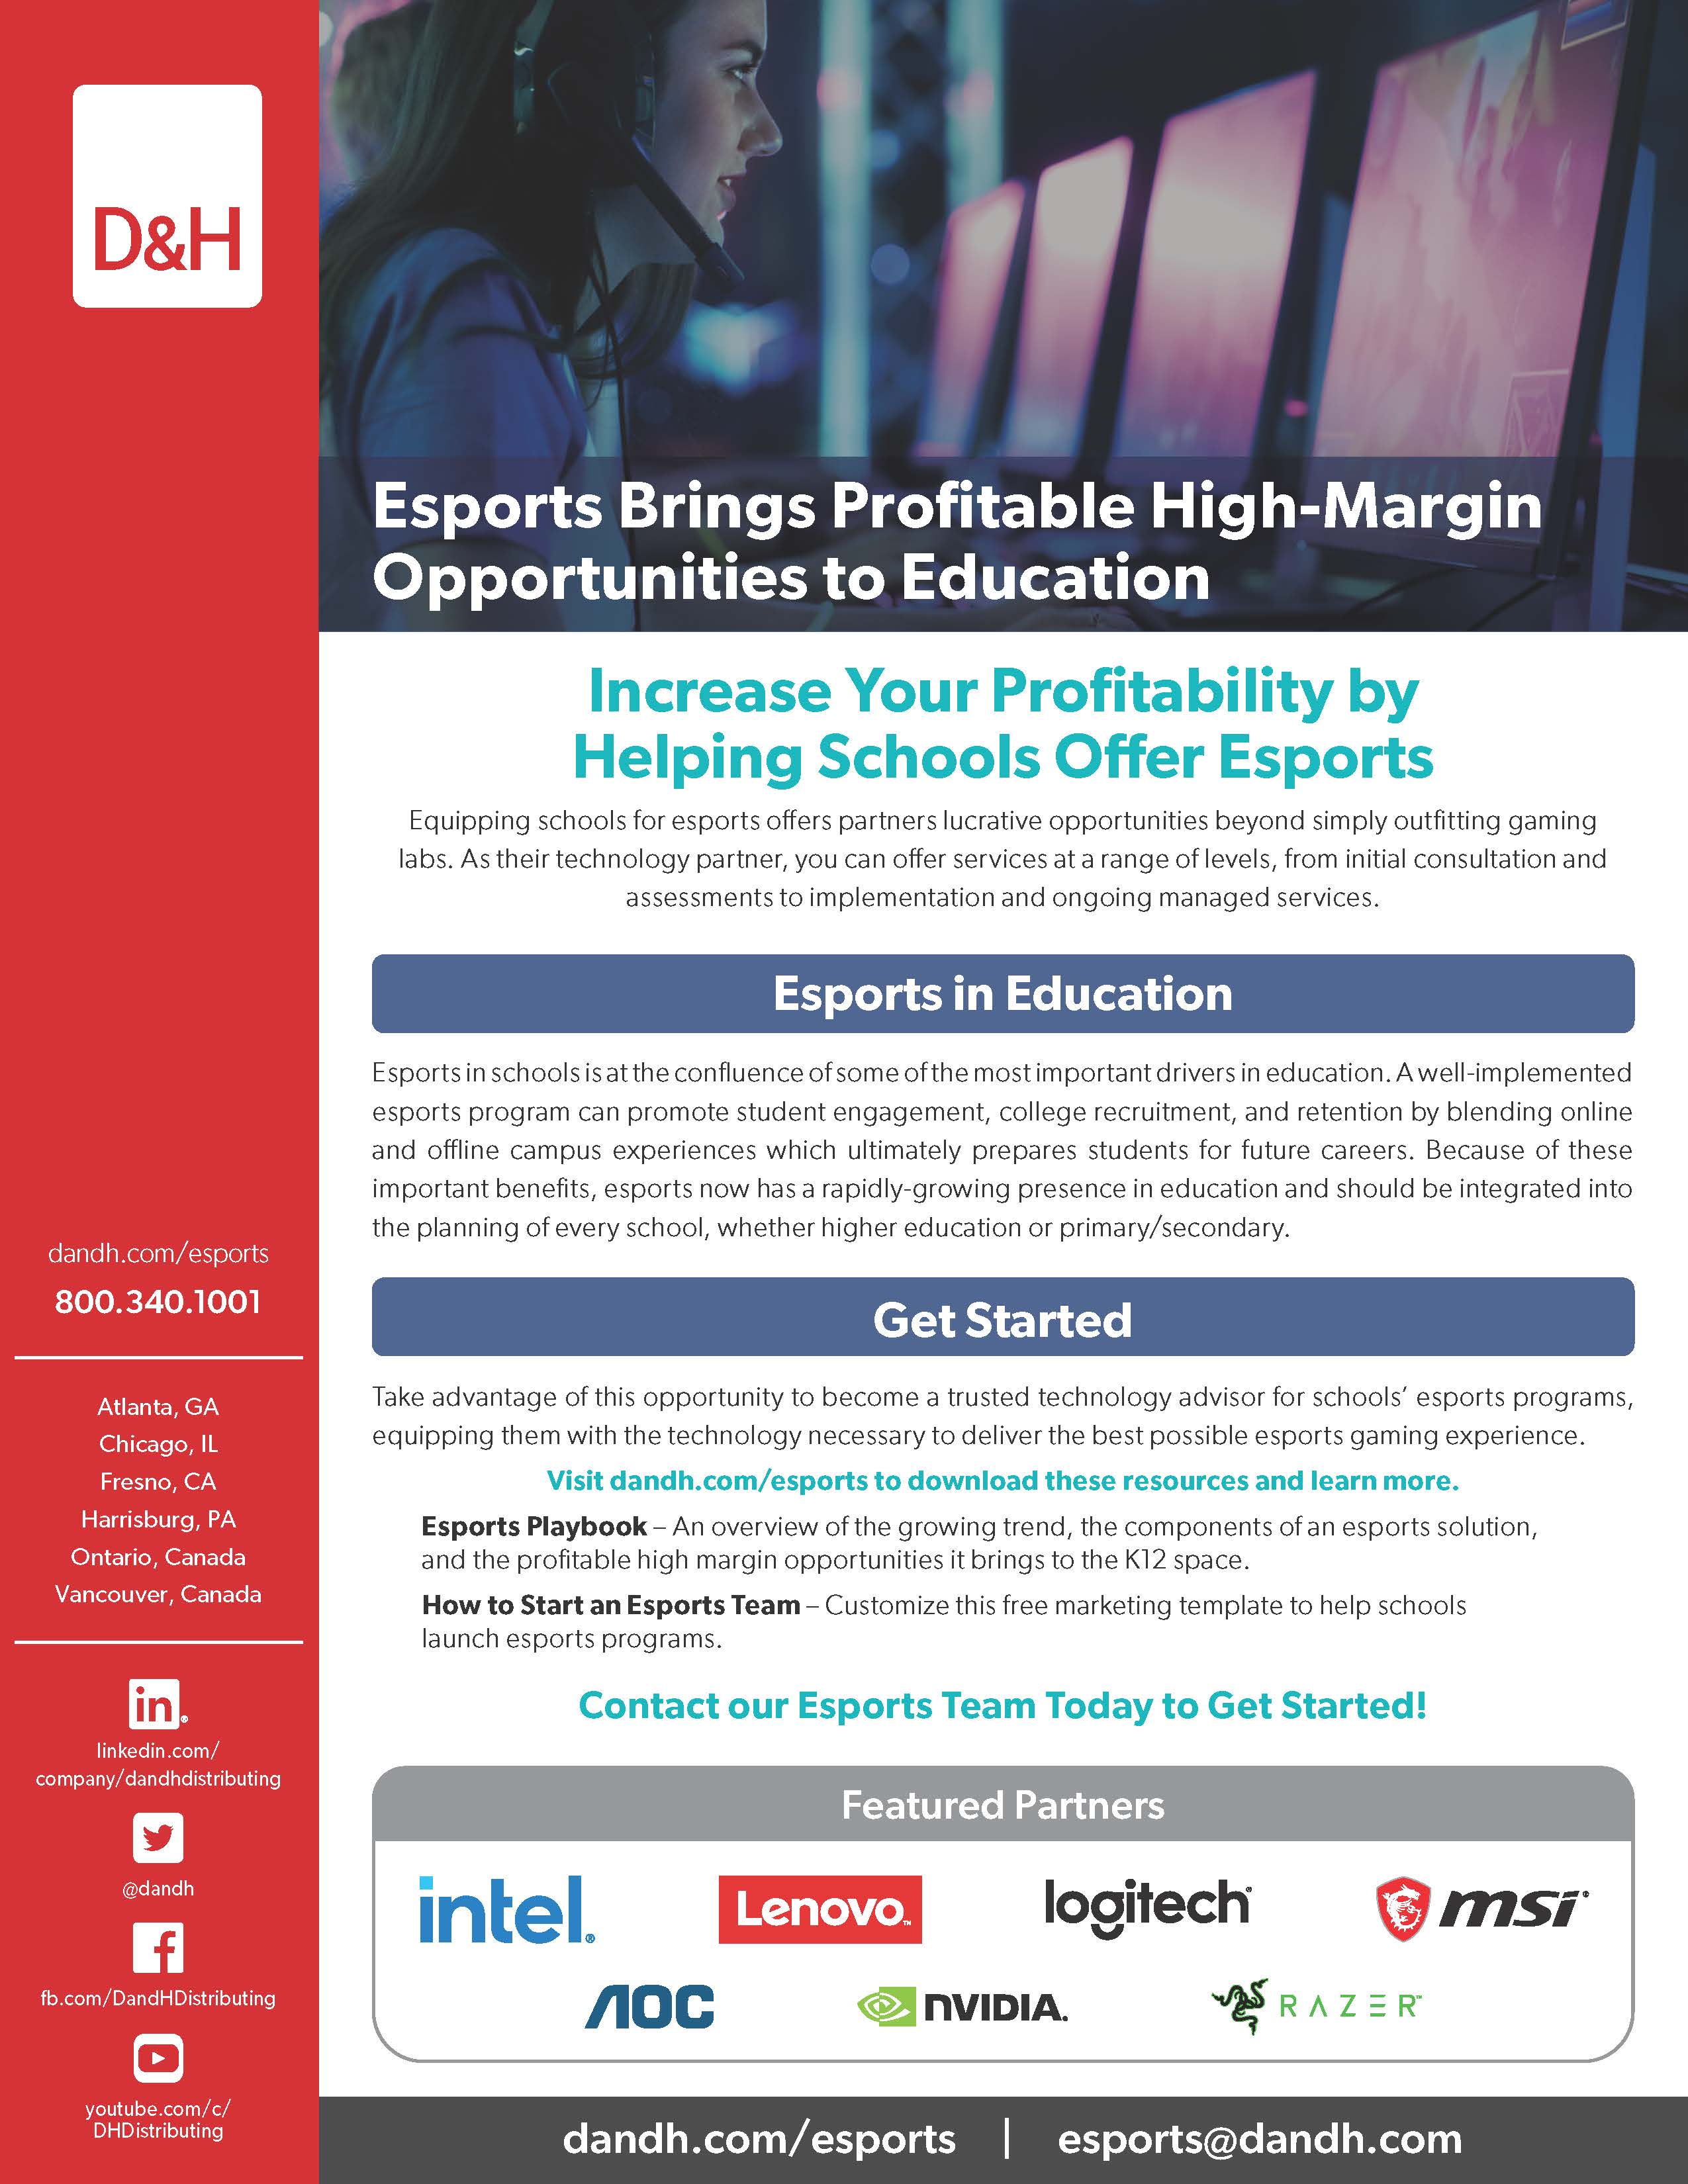 Increase Your Profitability by Helping Schools Offer Esports